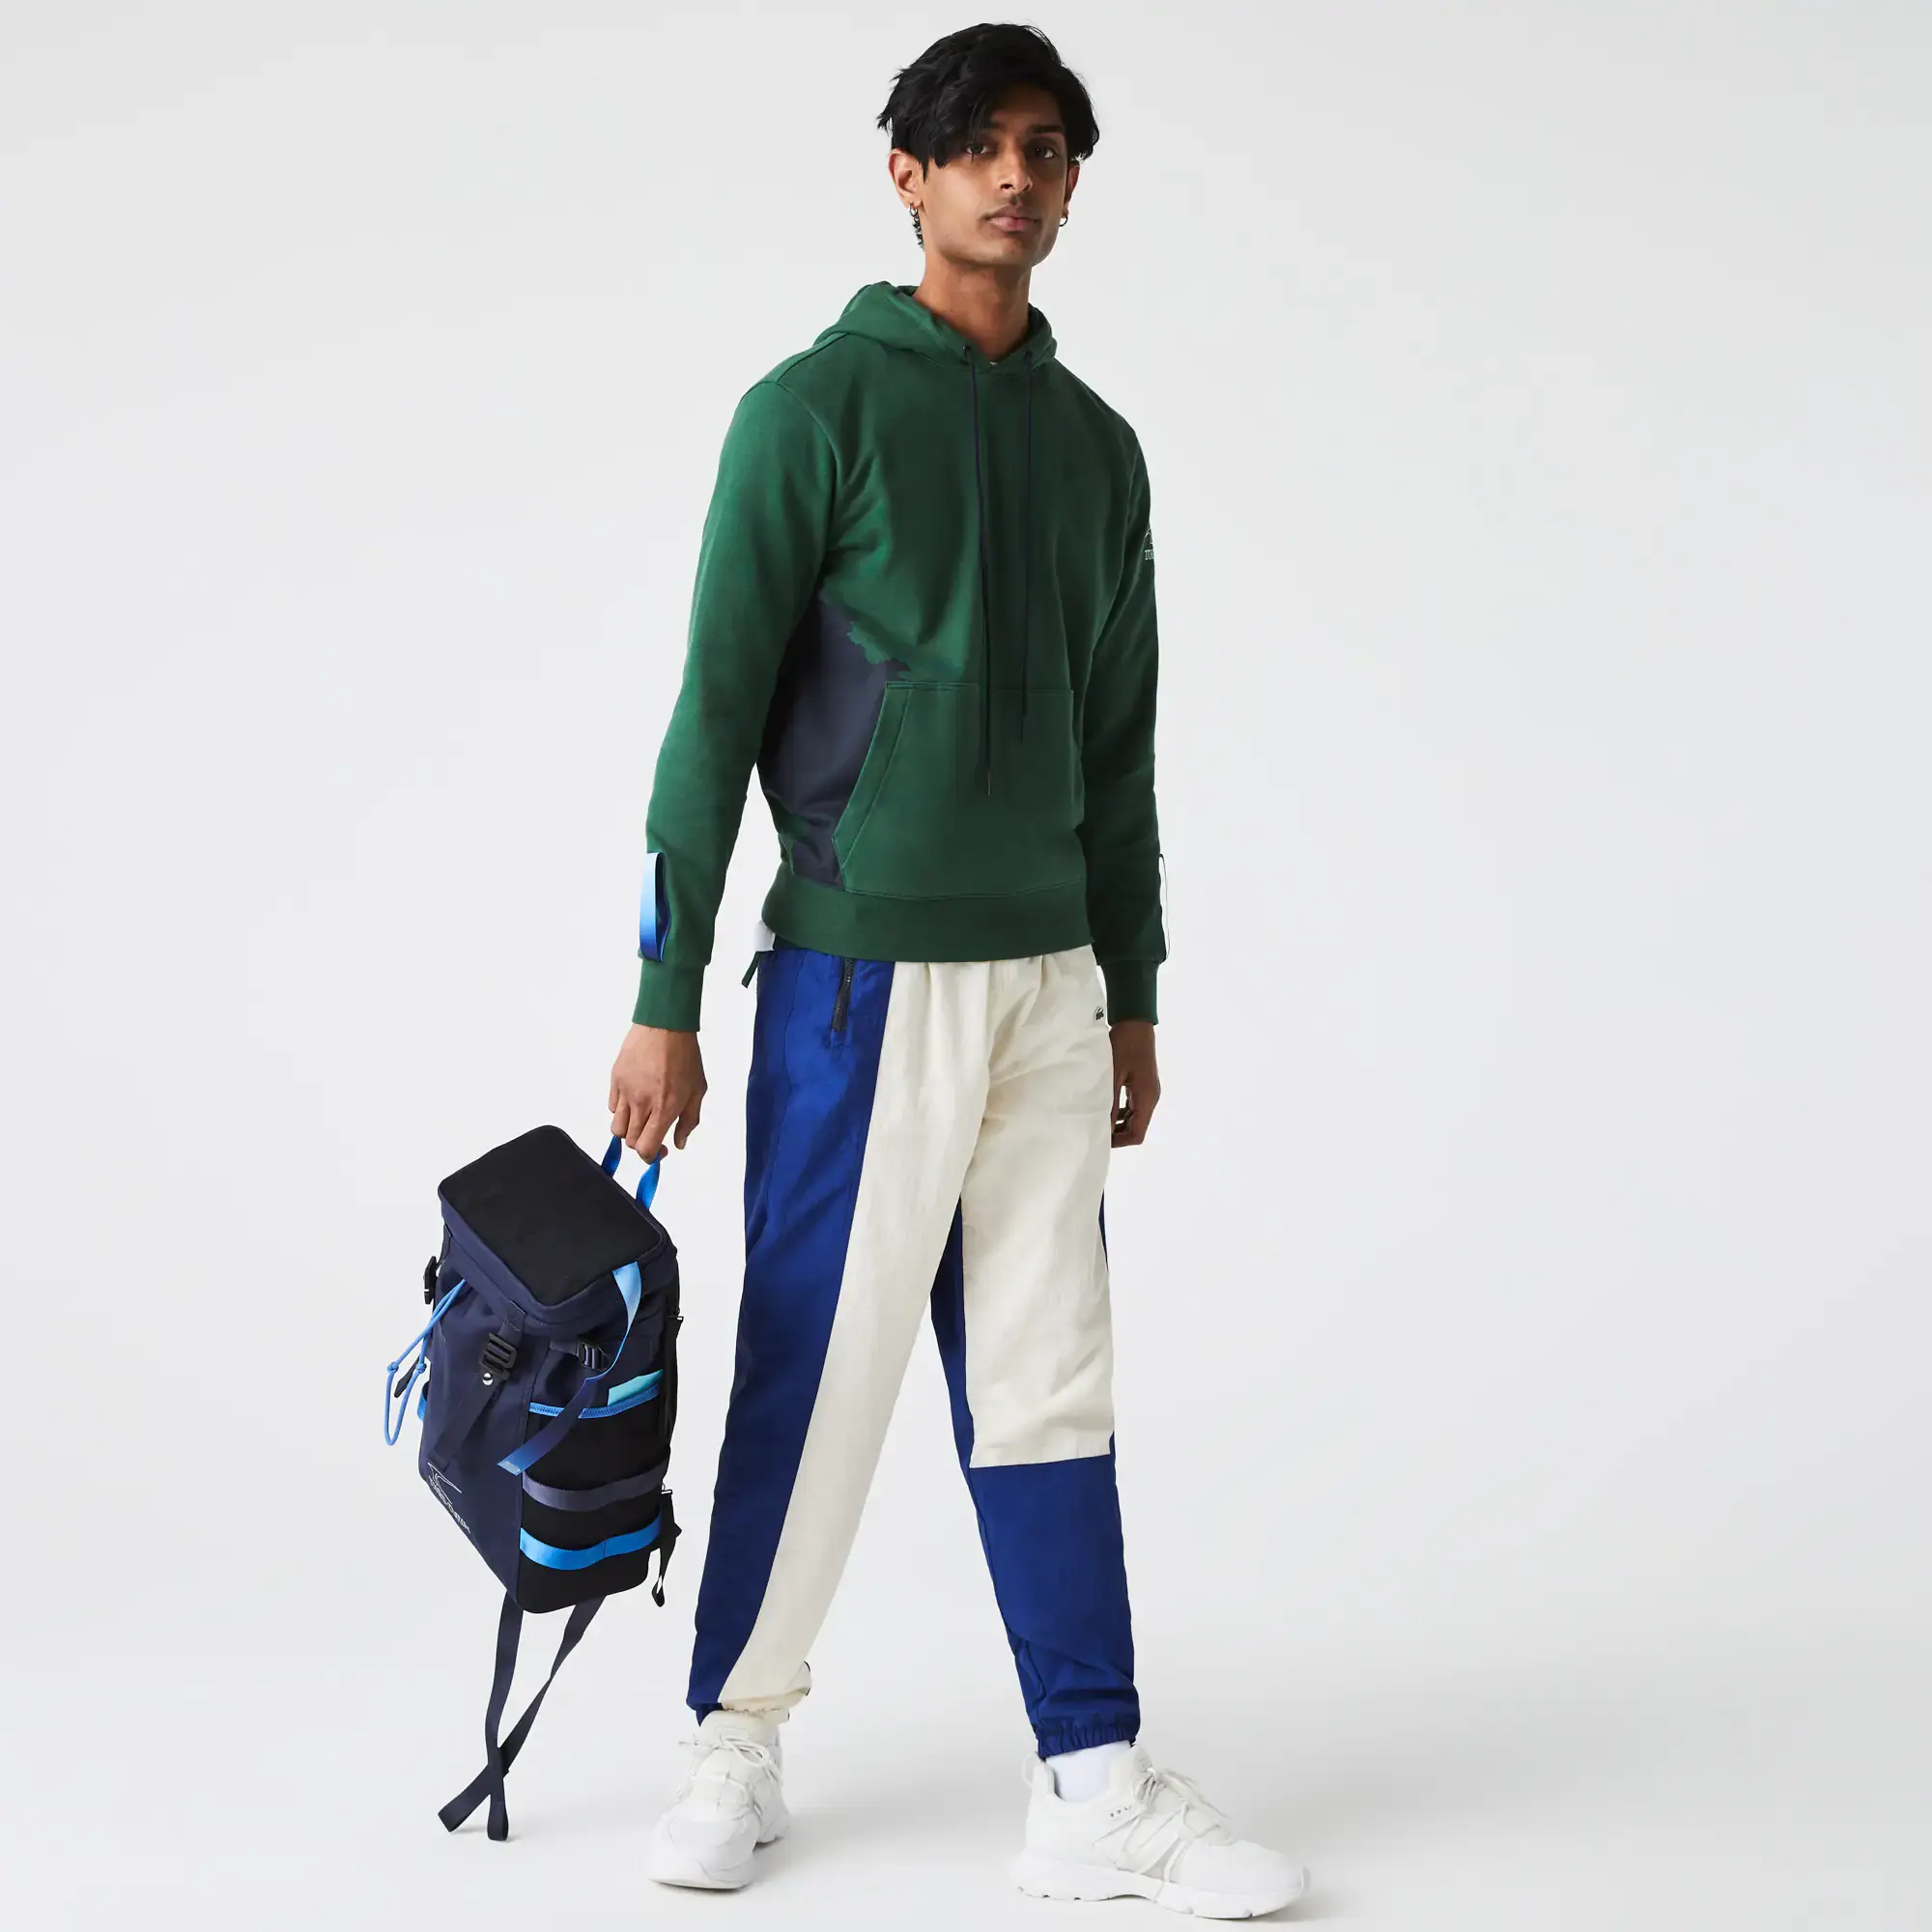 Lacoste Men's Lacoste x Théo Curin Technical Canvas Backpack. 1